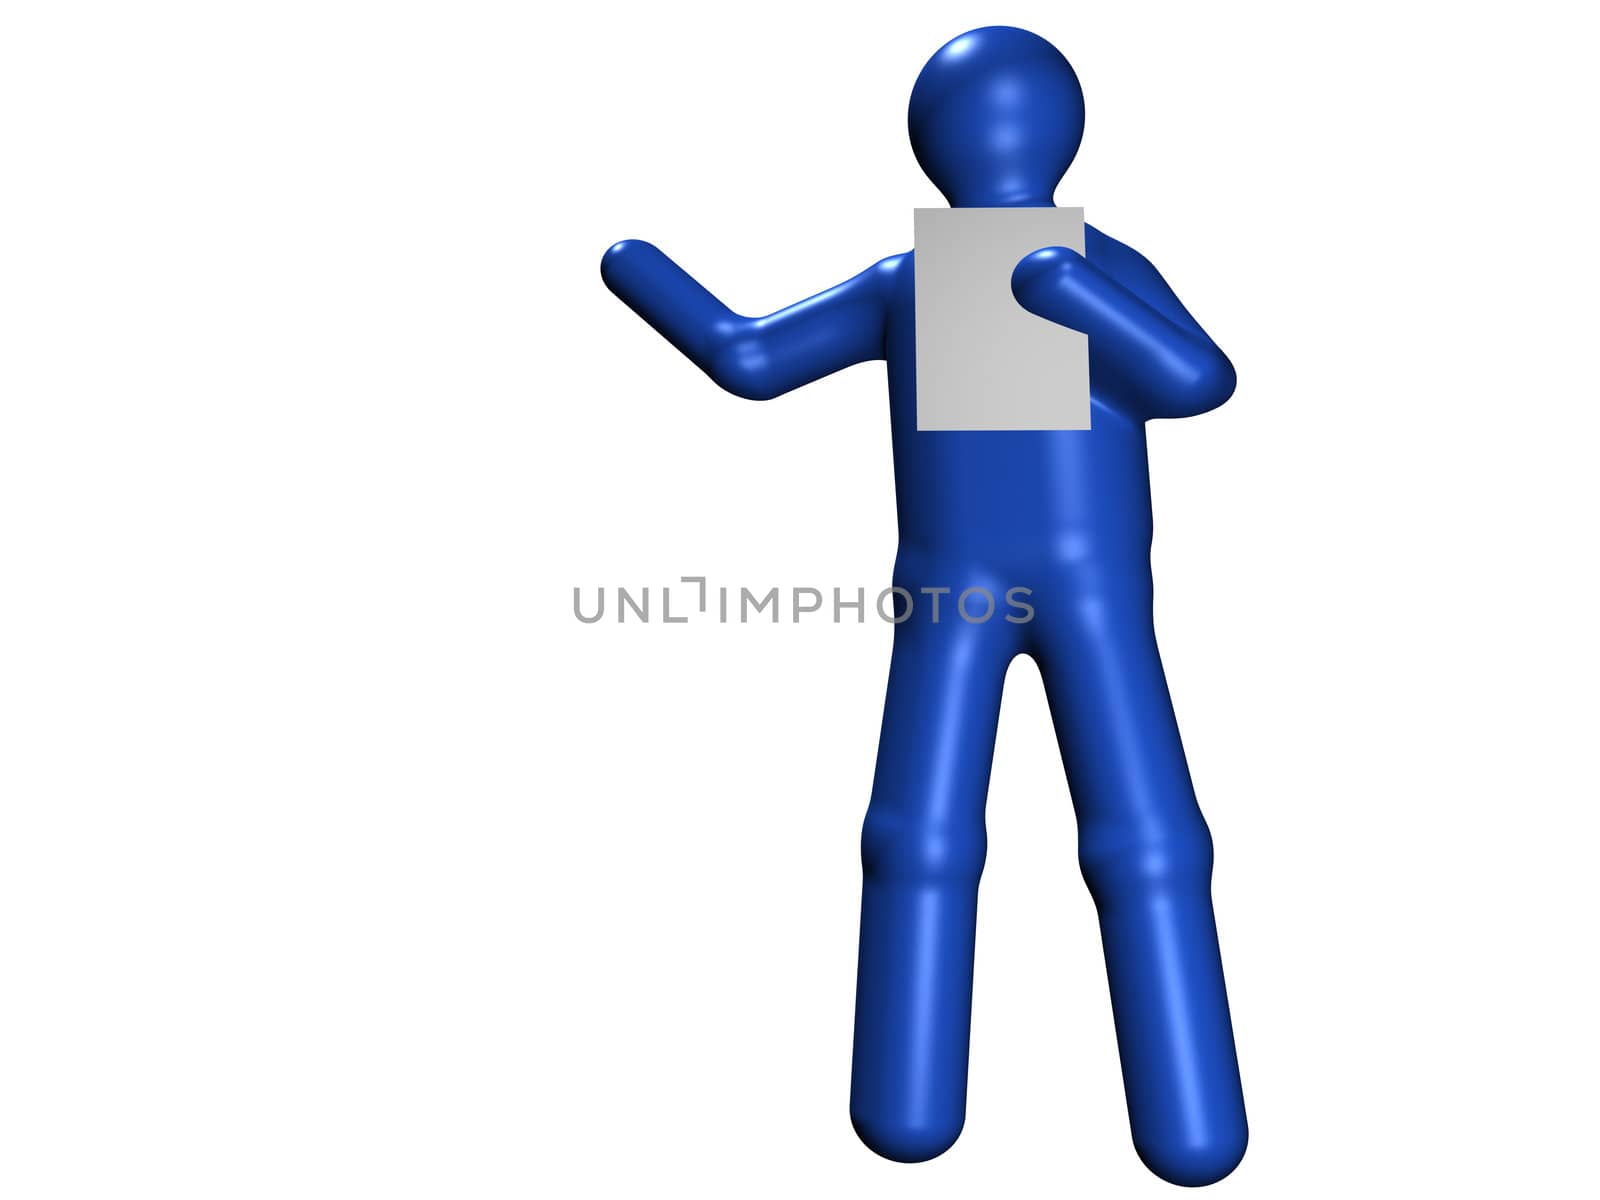 A stylized person makes a report. All isolated on white background.